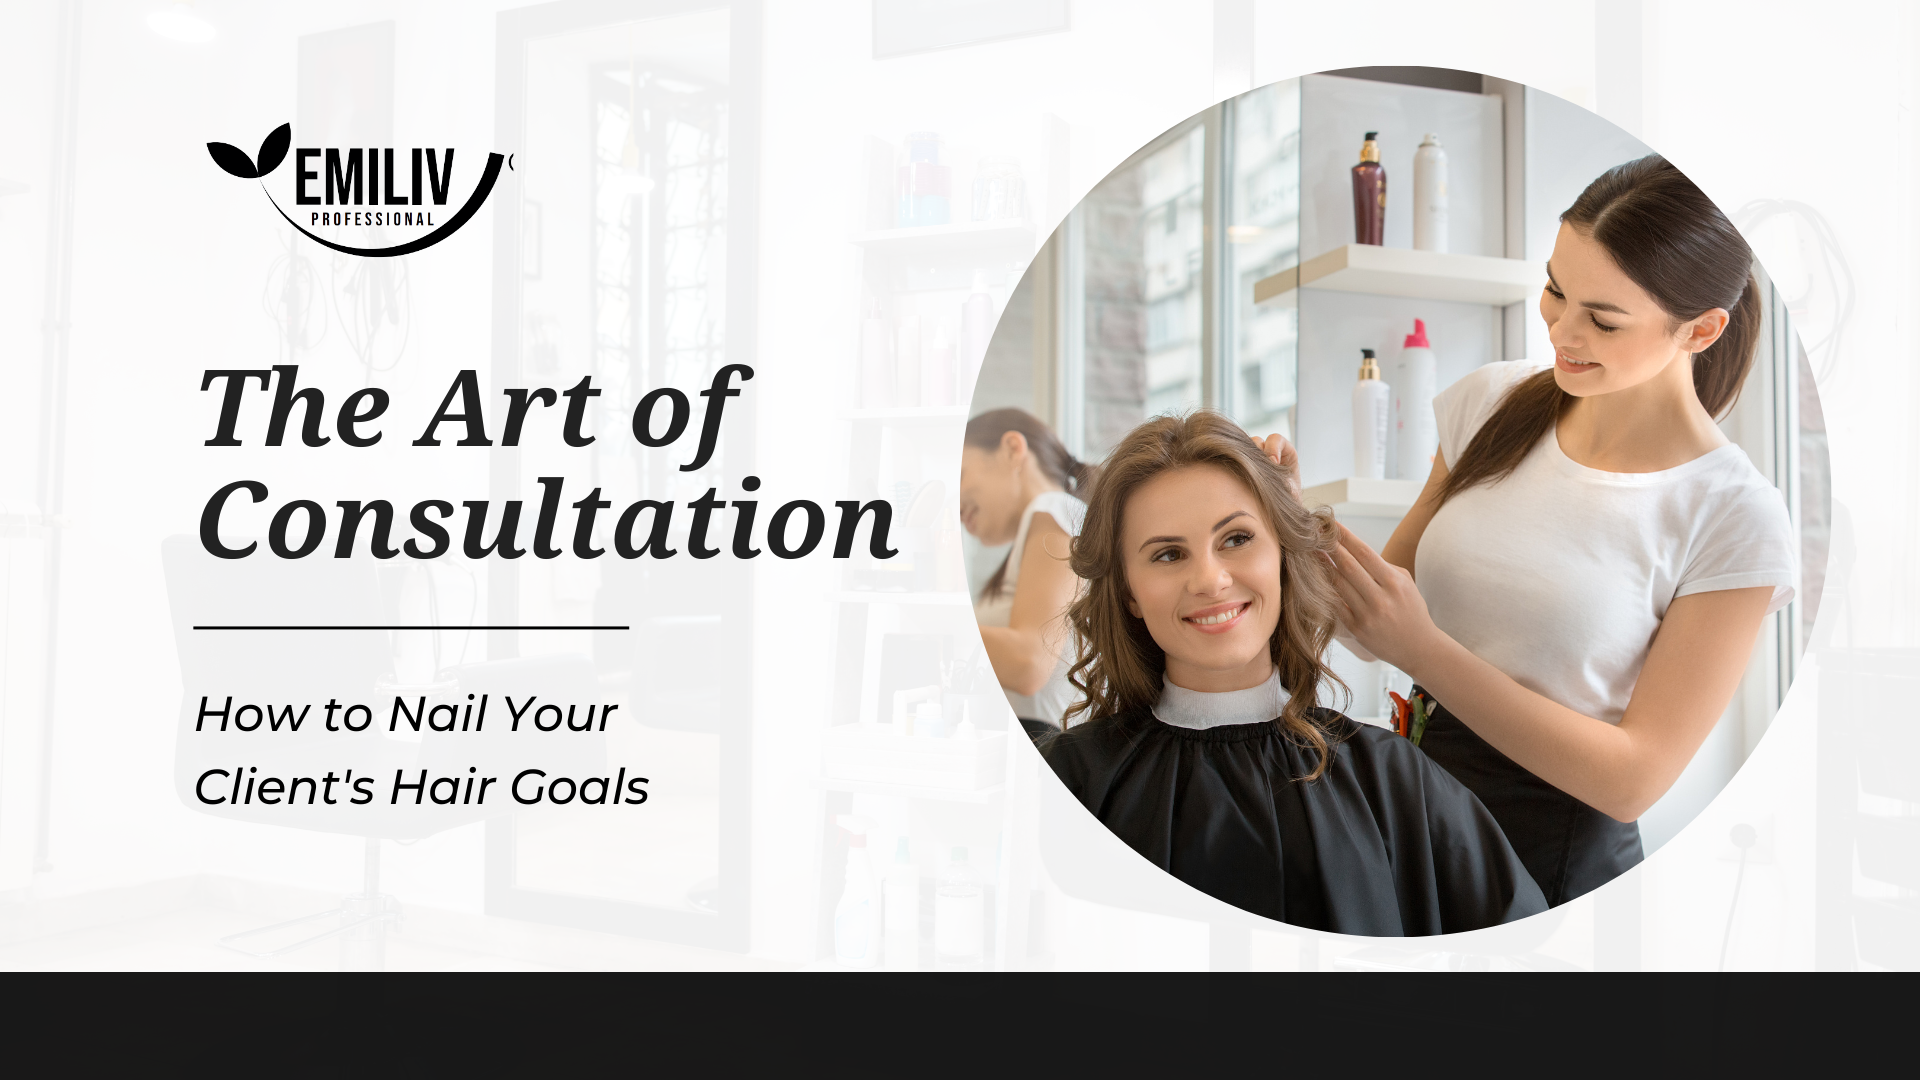 The Art of Consultation: How to Nail Your Client's Hair Goals